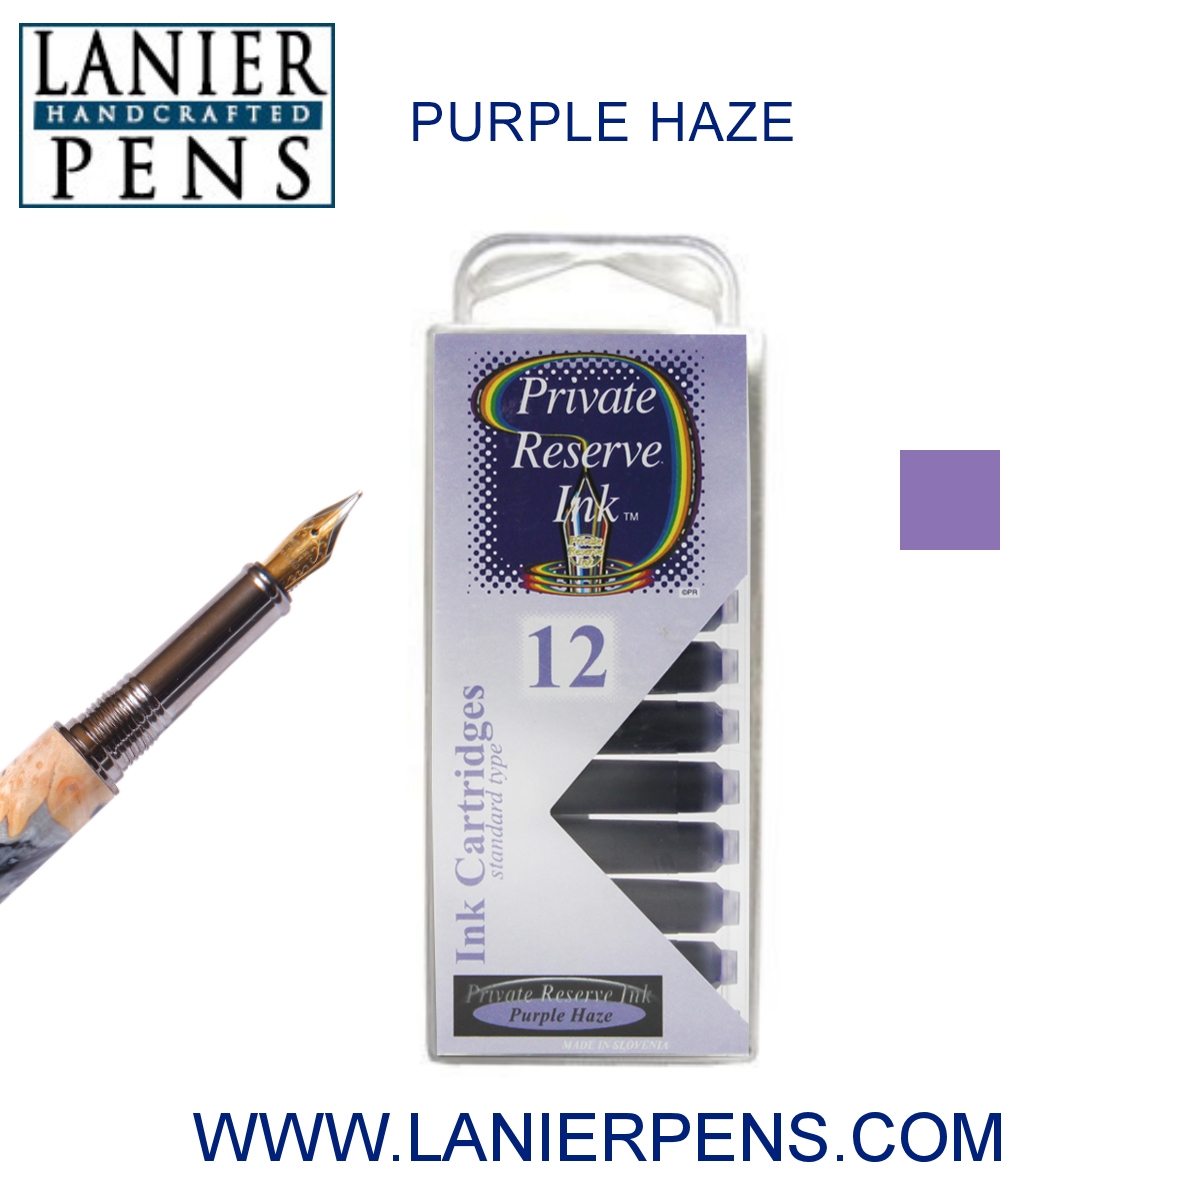 12 Pack - Private Reserve Ink, Universal Fountain Pen Ink Cartridges Clear Case, Purple Haze by Lanier Pens